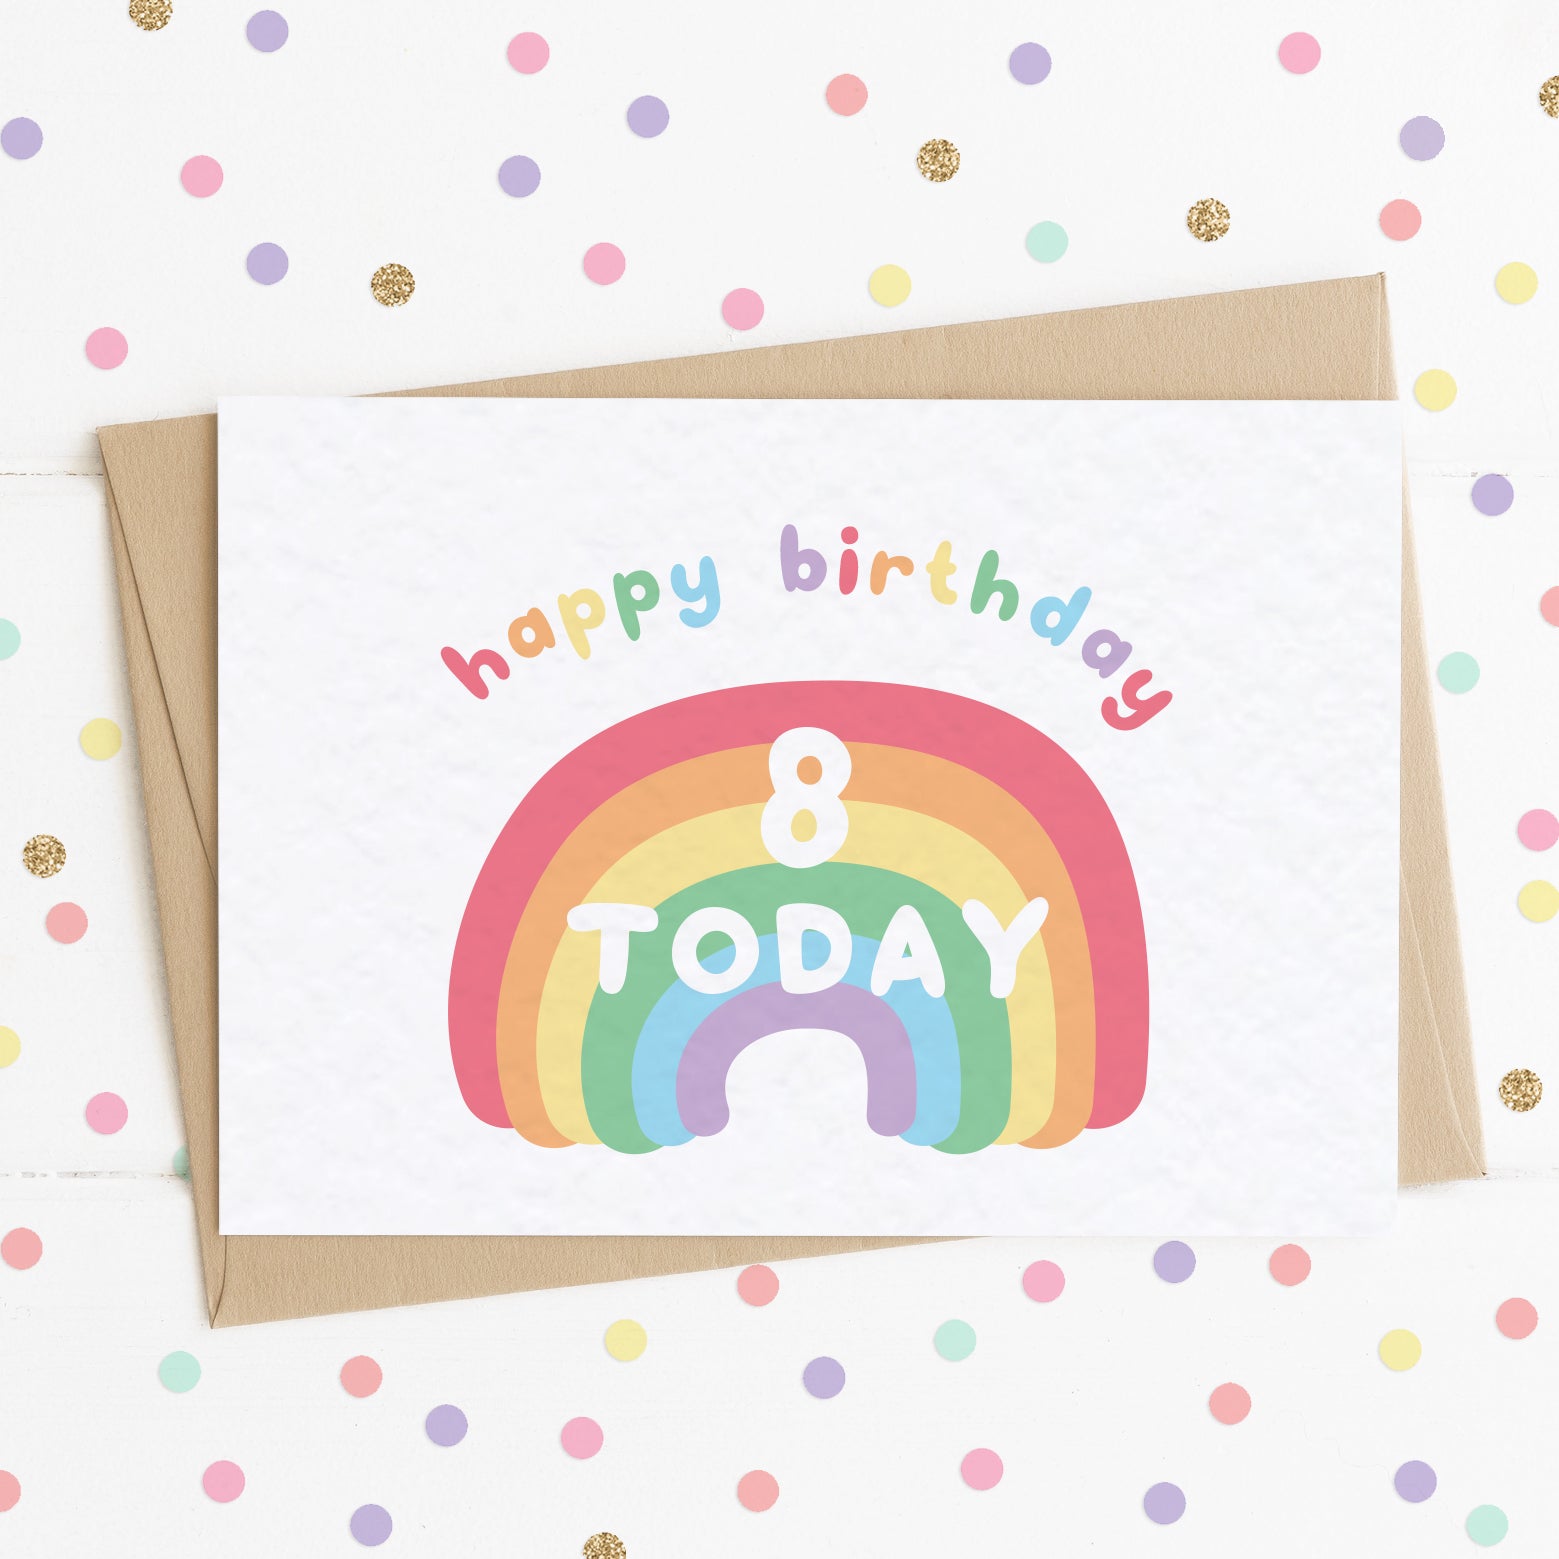 A cute milestone age birthday card with a smiling happy rainbow on it and the message "HAPPY BIRTHDAY - 8 TODAY".